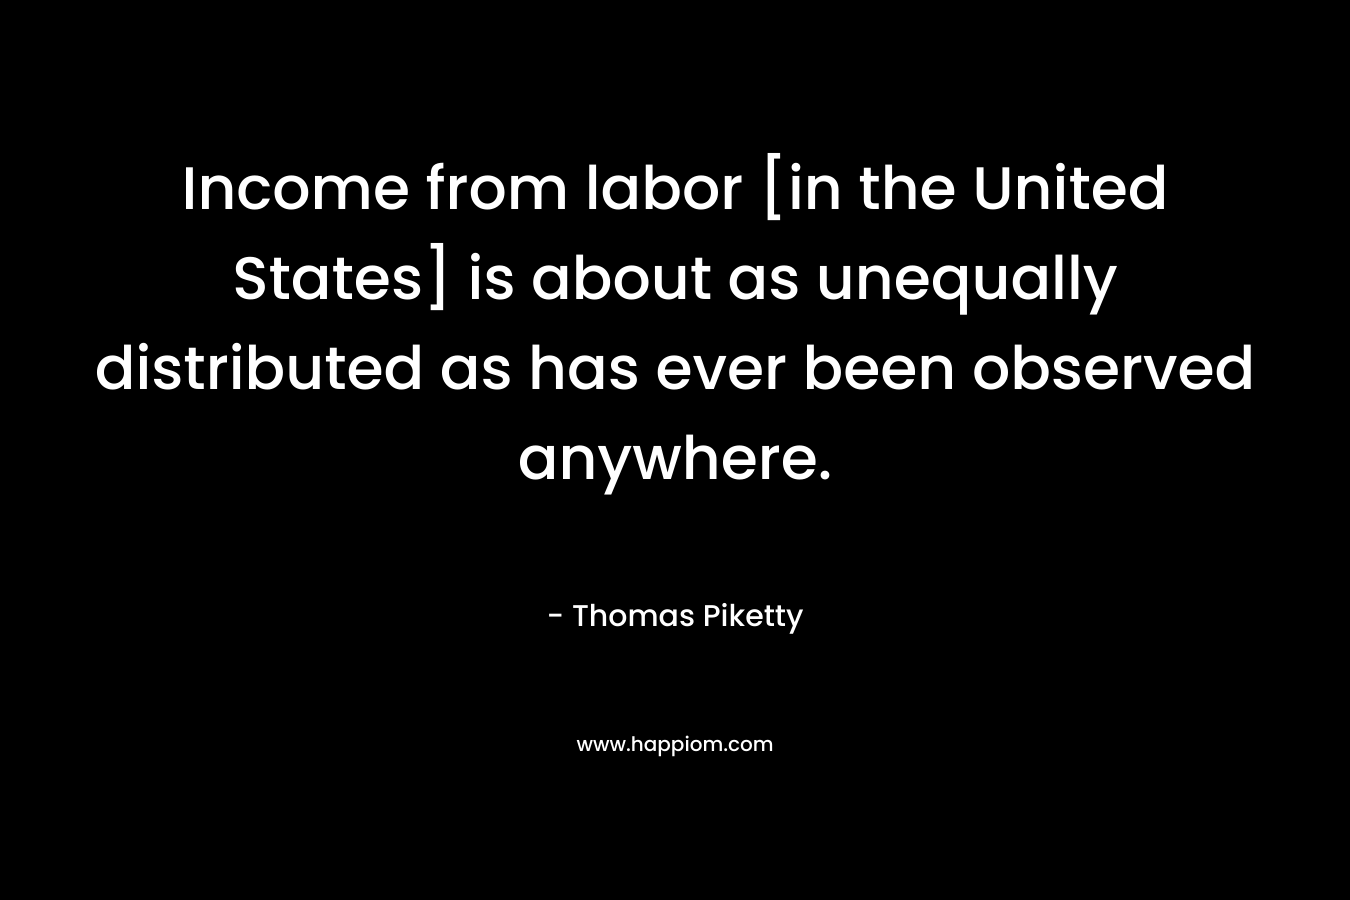 Income from labor [in the United States] is about as unequally distributed as has ever been observed anywhere.